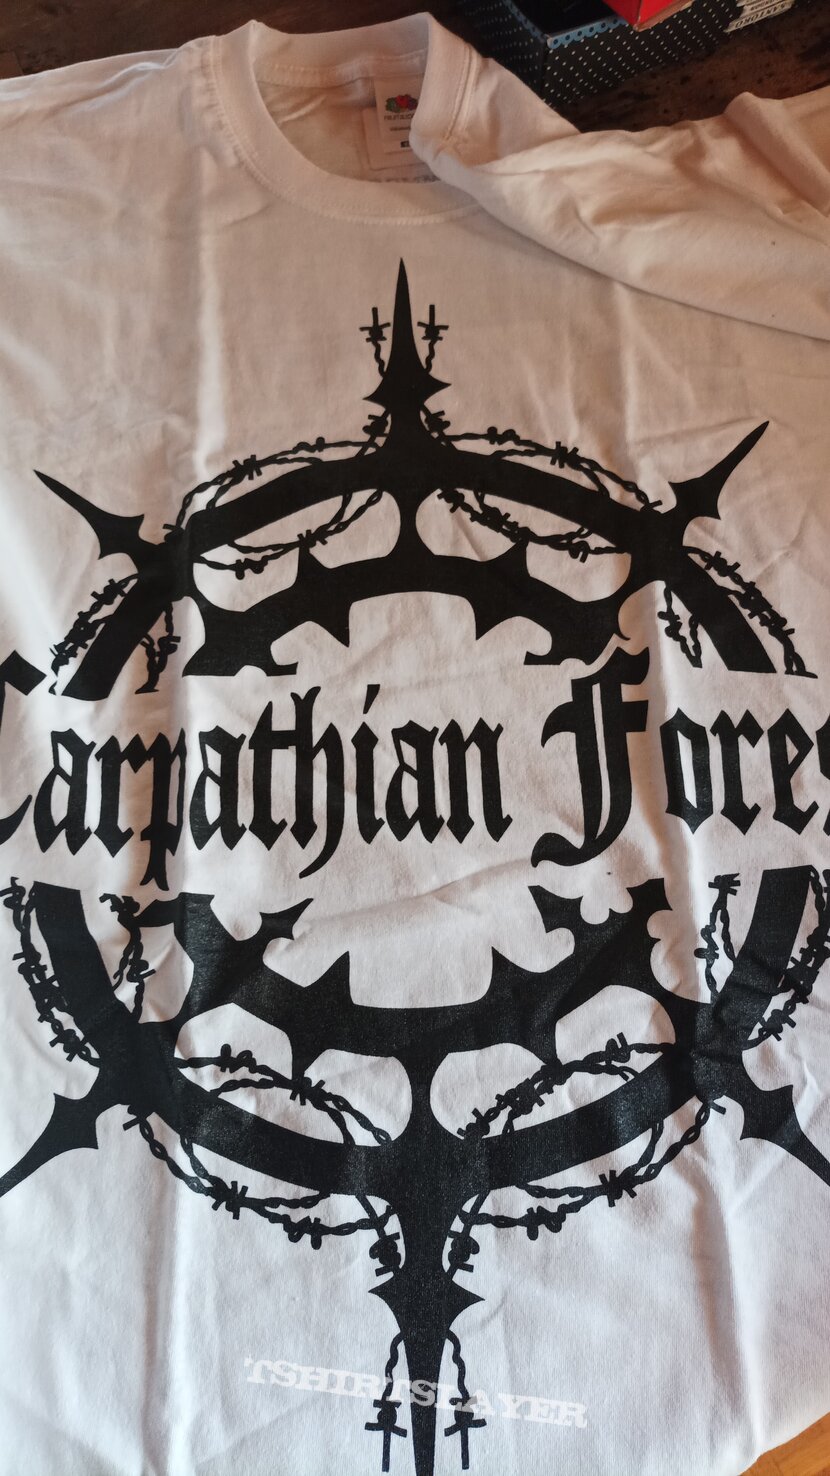 Carpathian Forest Fvck you all